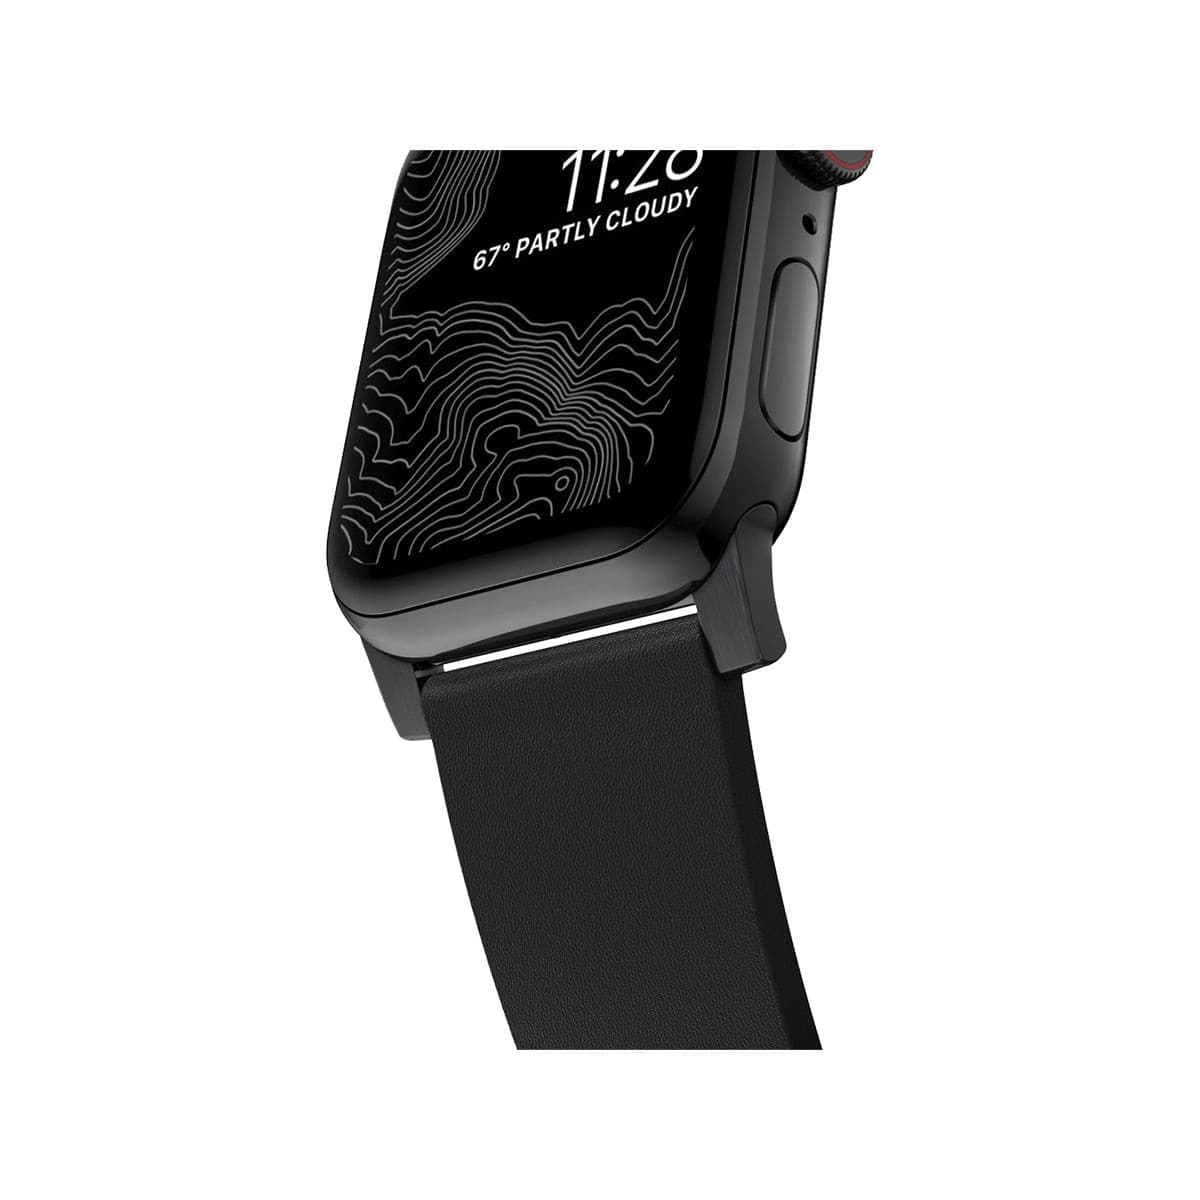 Nomad Active Band Pro 45mm - Black Hard with Black Leather Strap.